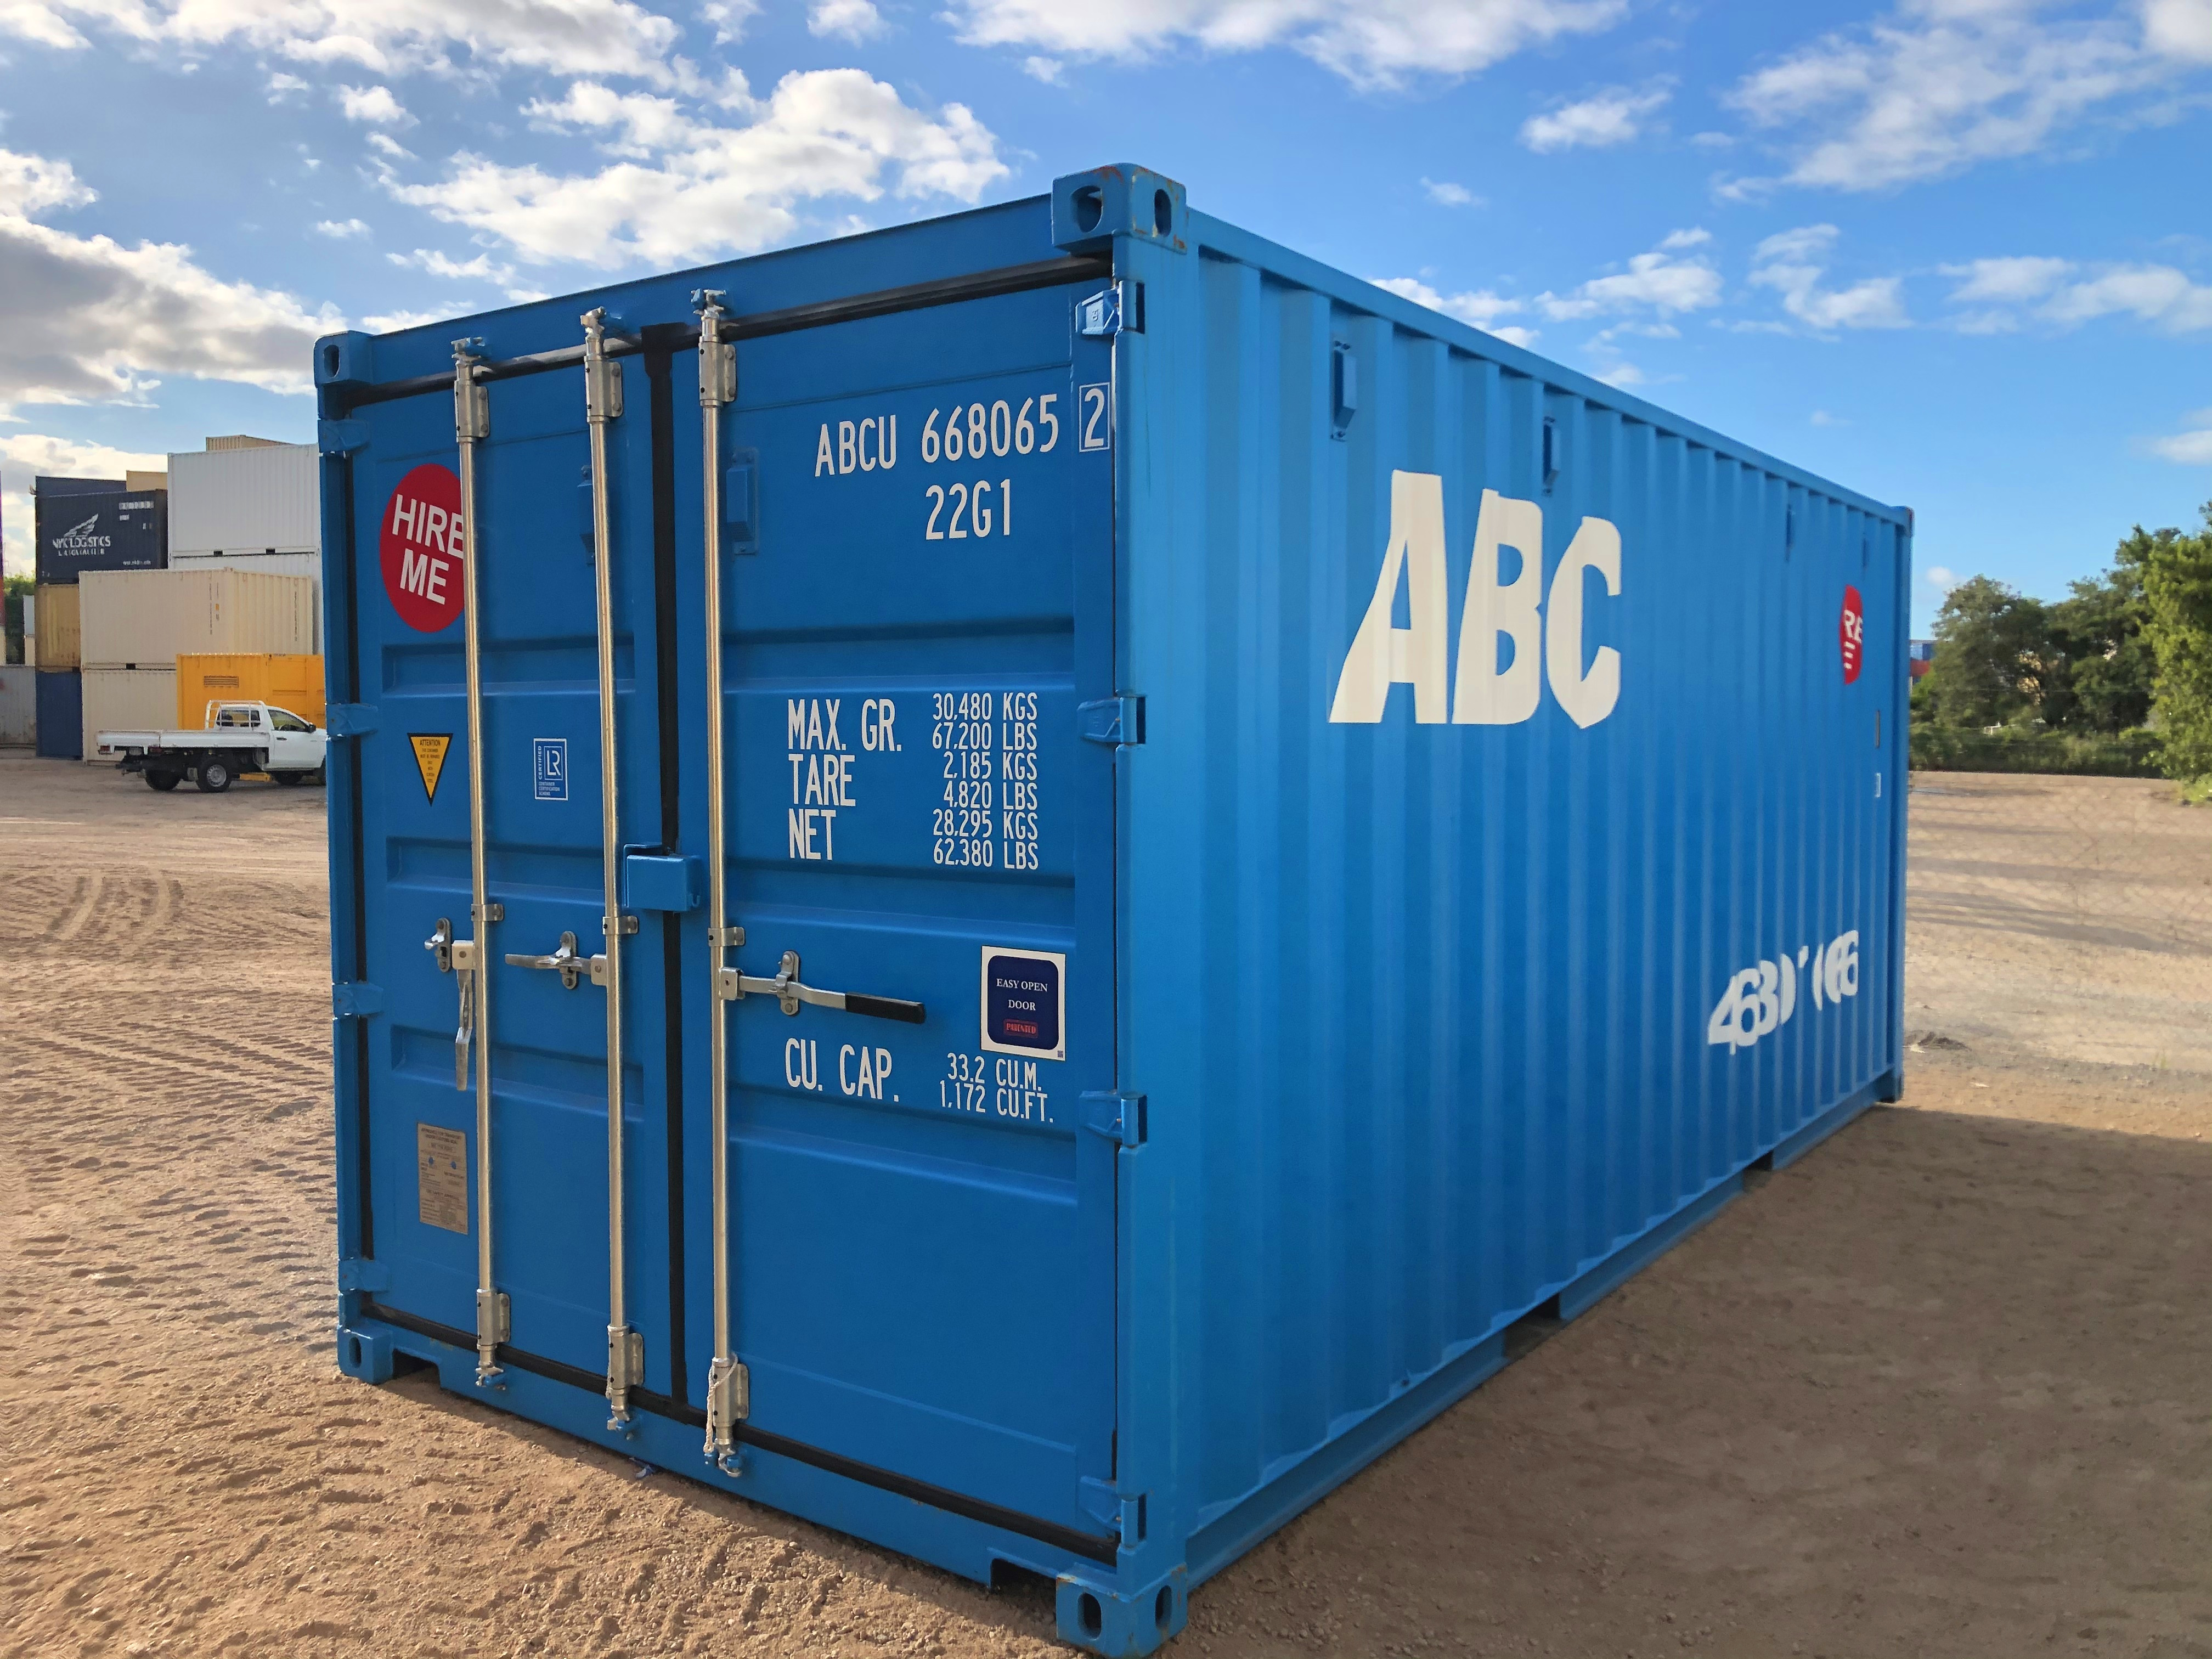 A blue shipping container with the ABC logo on the side.